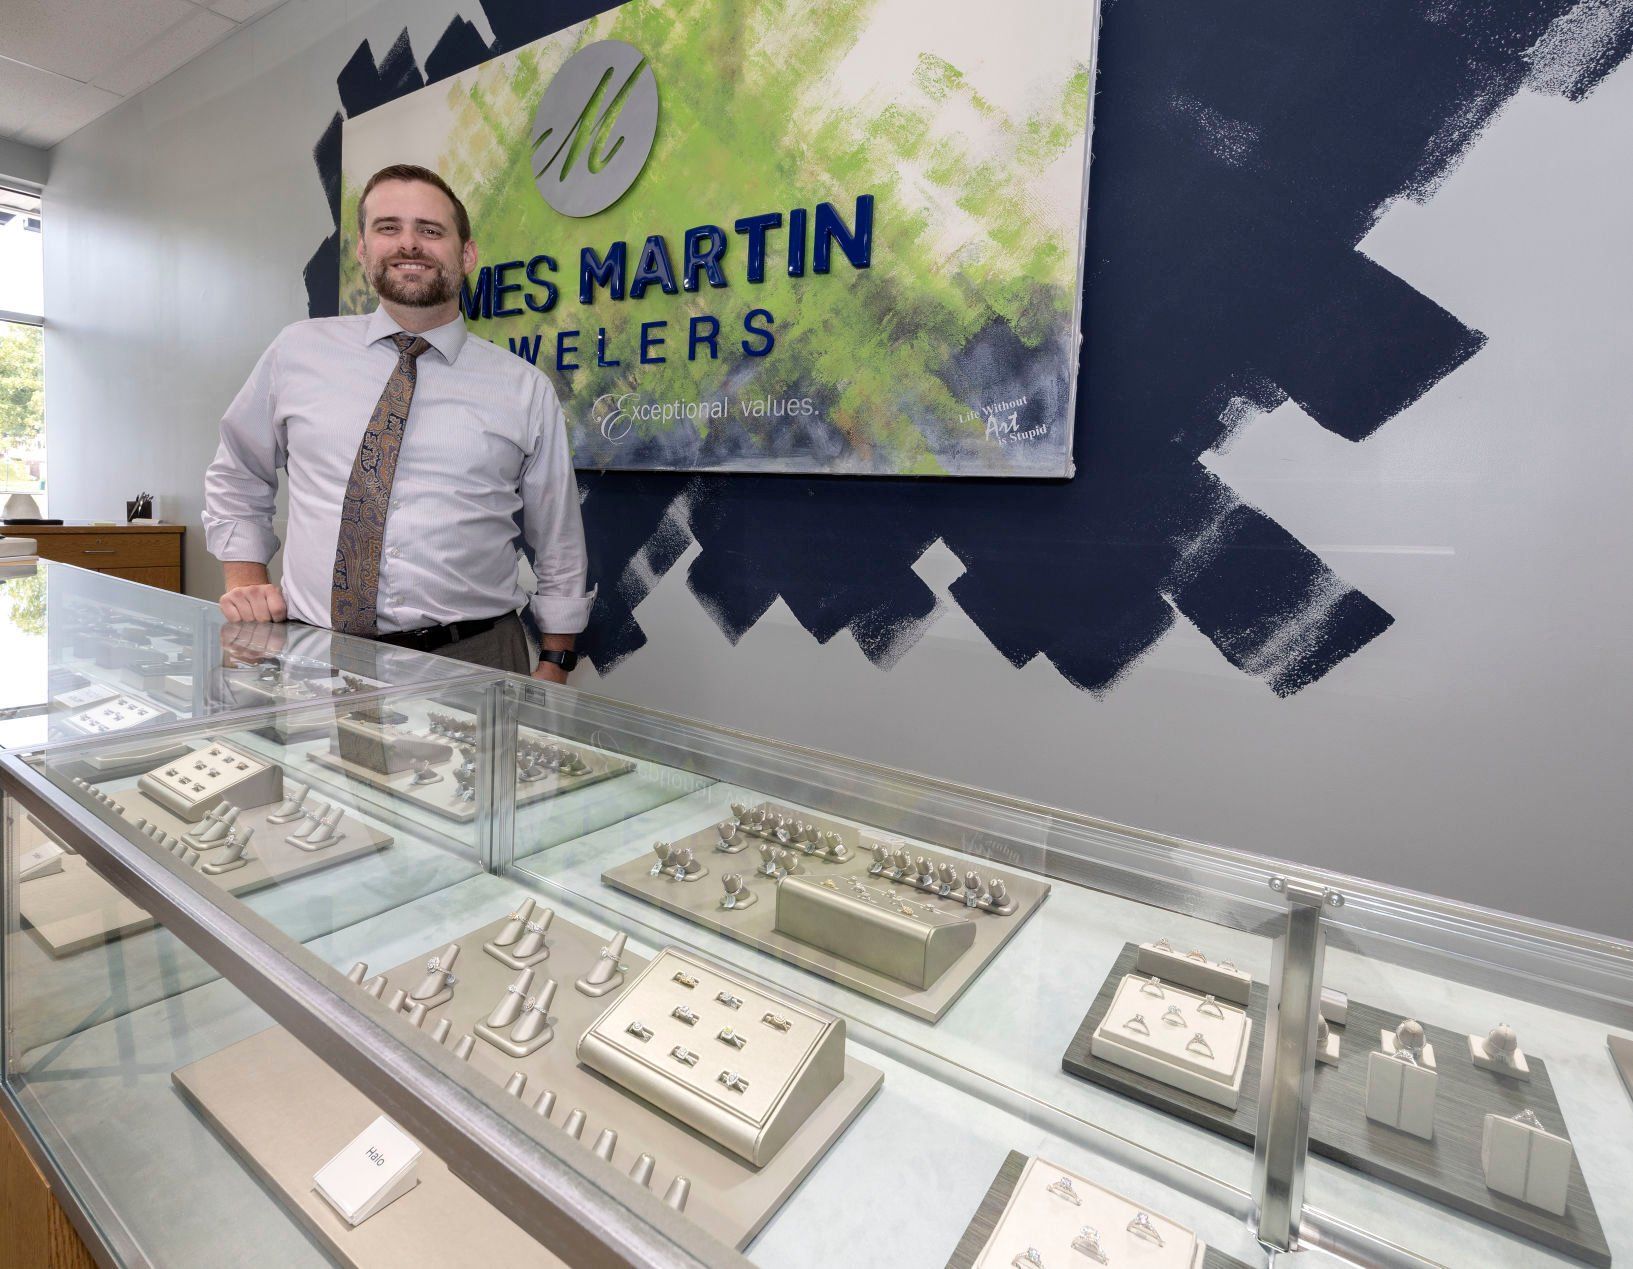 Co-owner Lucas Doland says James Martin Jewelers aims to move to its new location in the middle of next year.    PHOTO CREDIT: Stephen Gassman